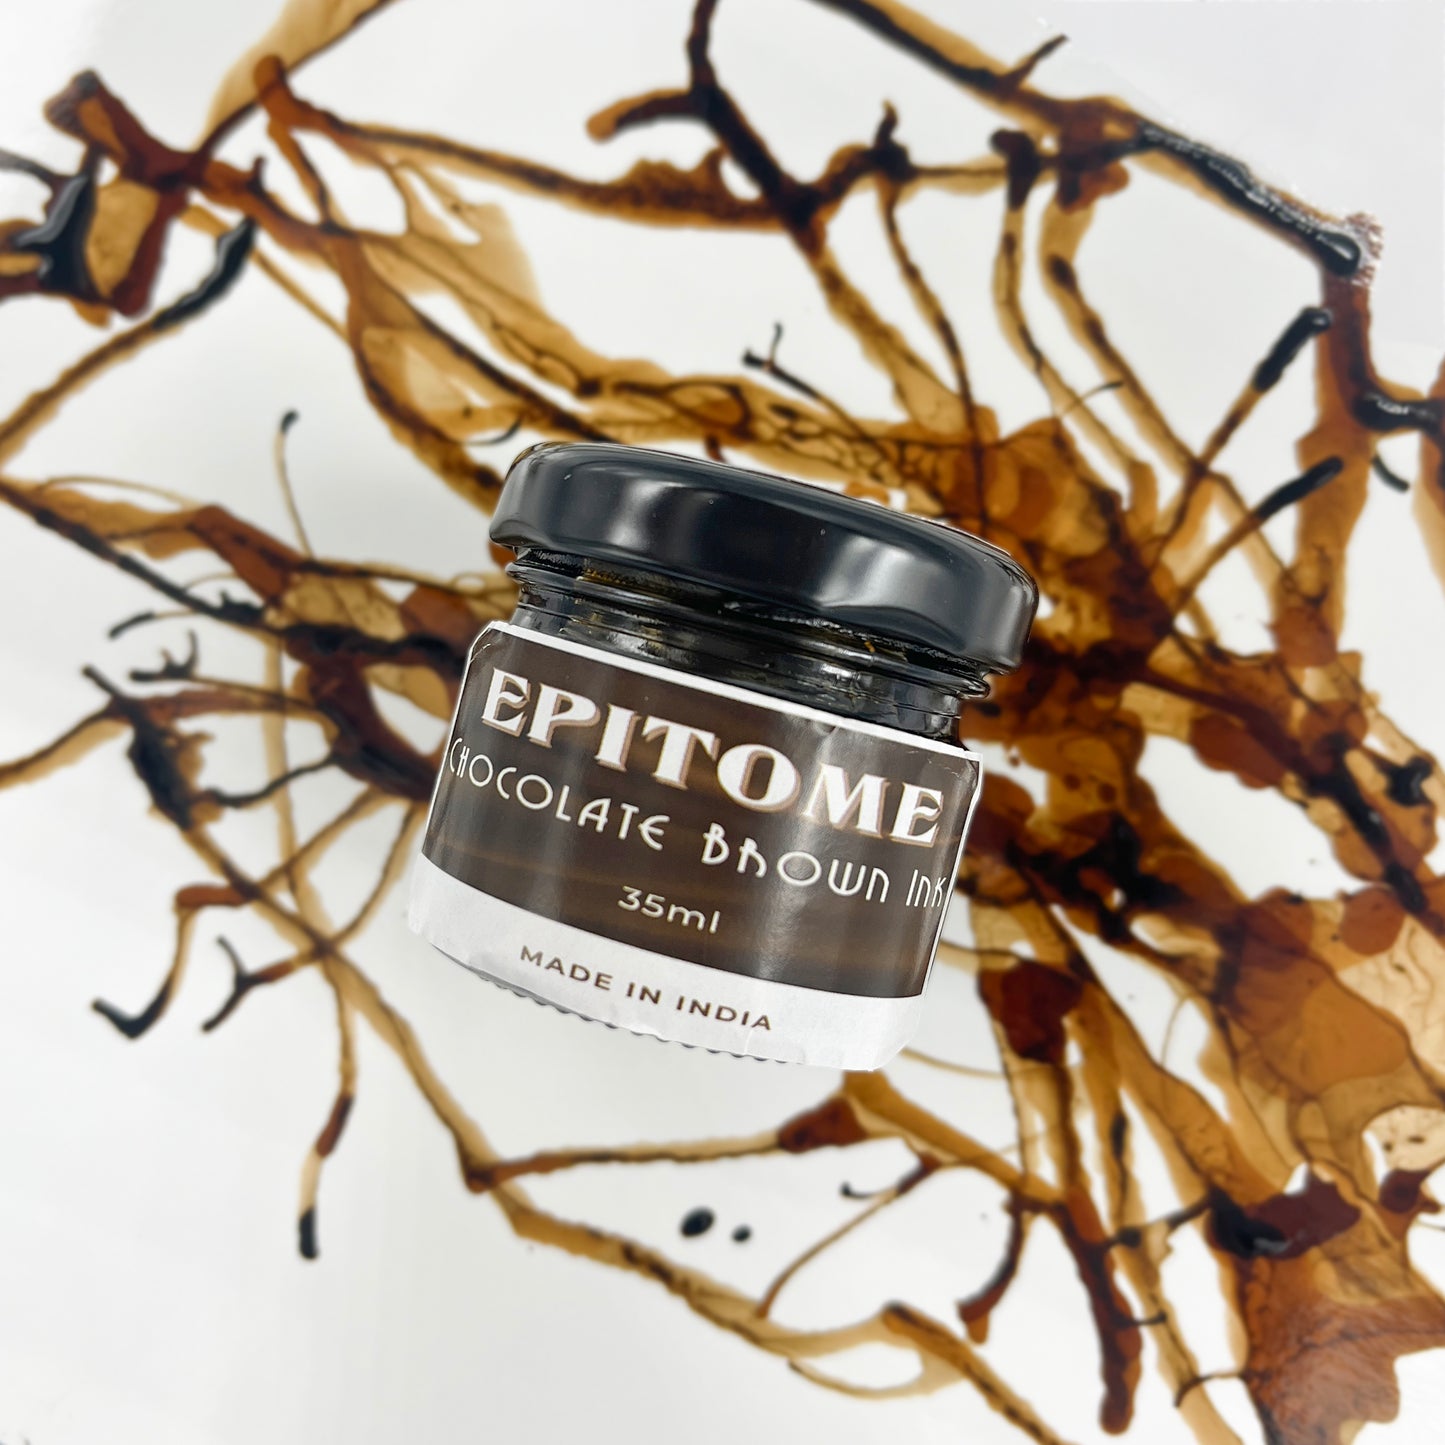 Epitome Chocolate Brown Ink - 35ml Bottle